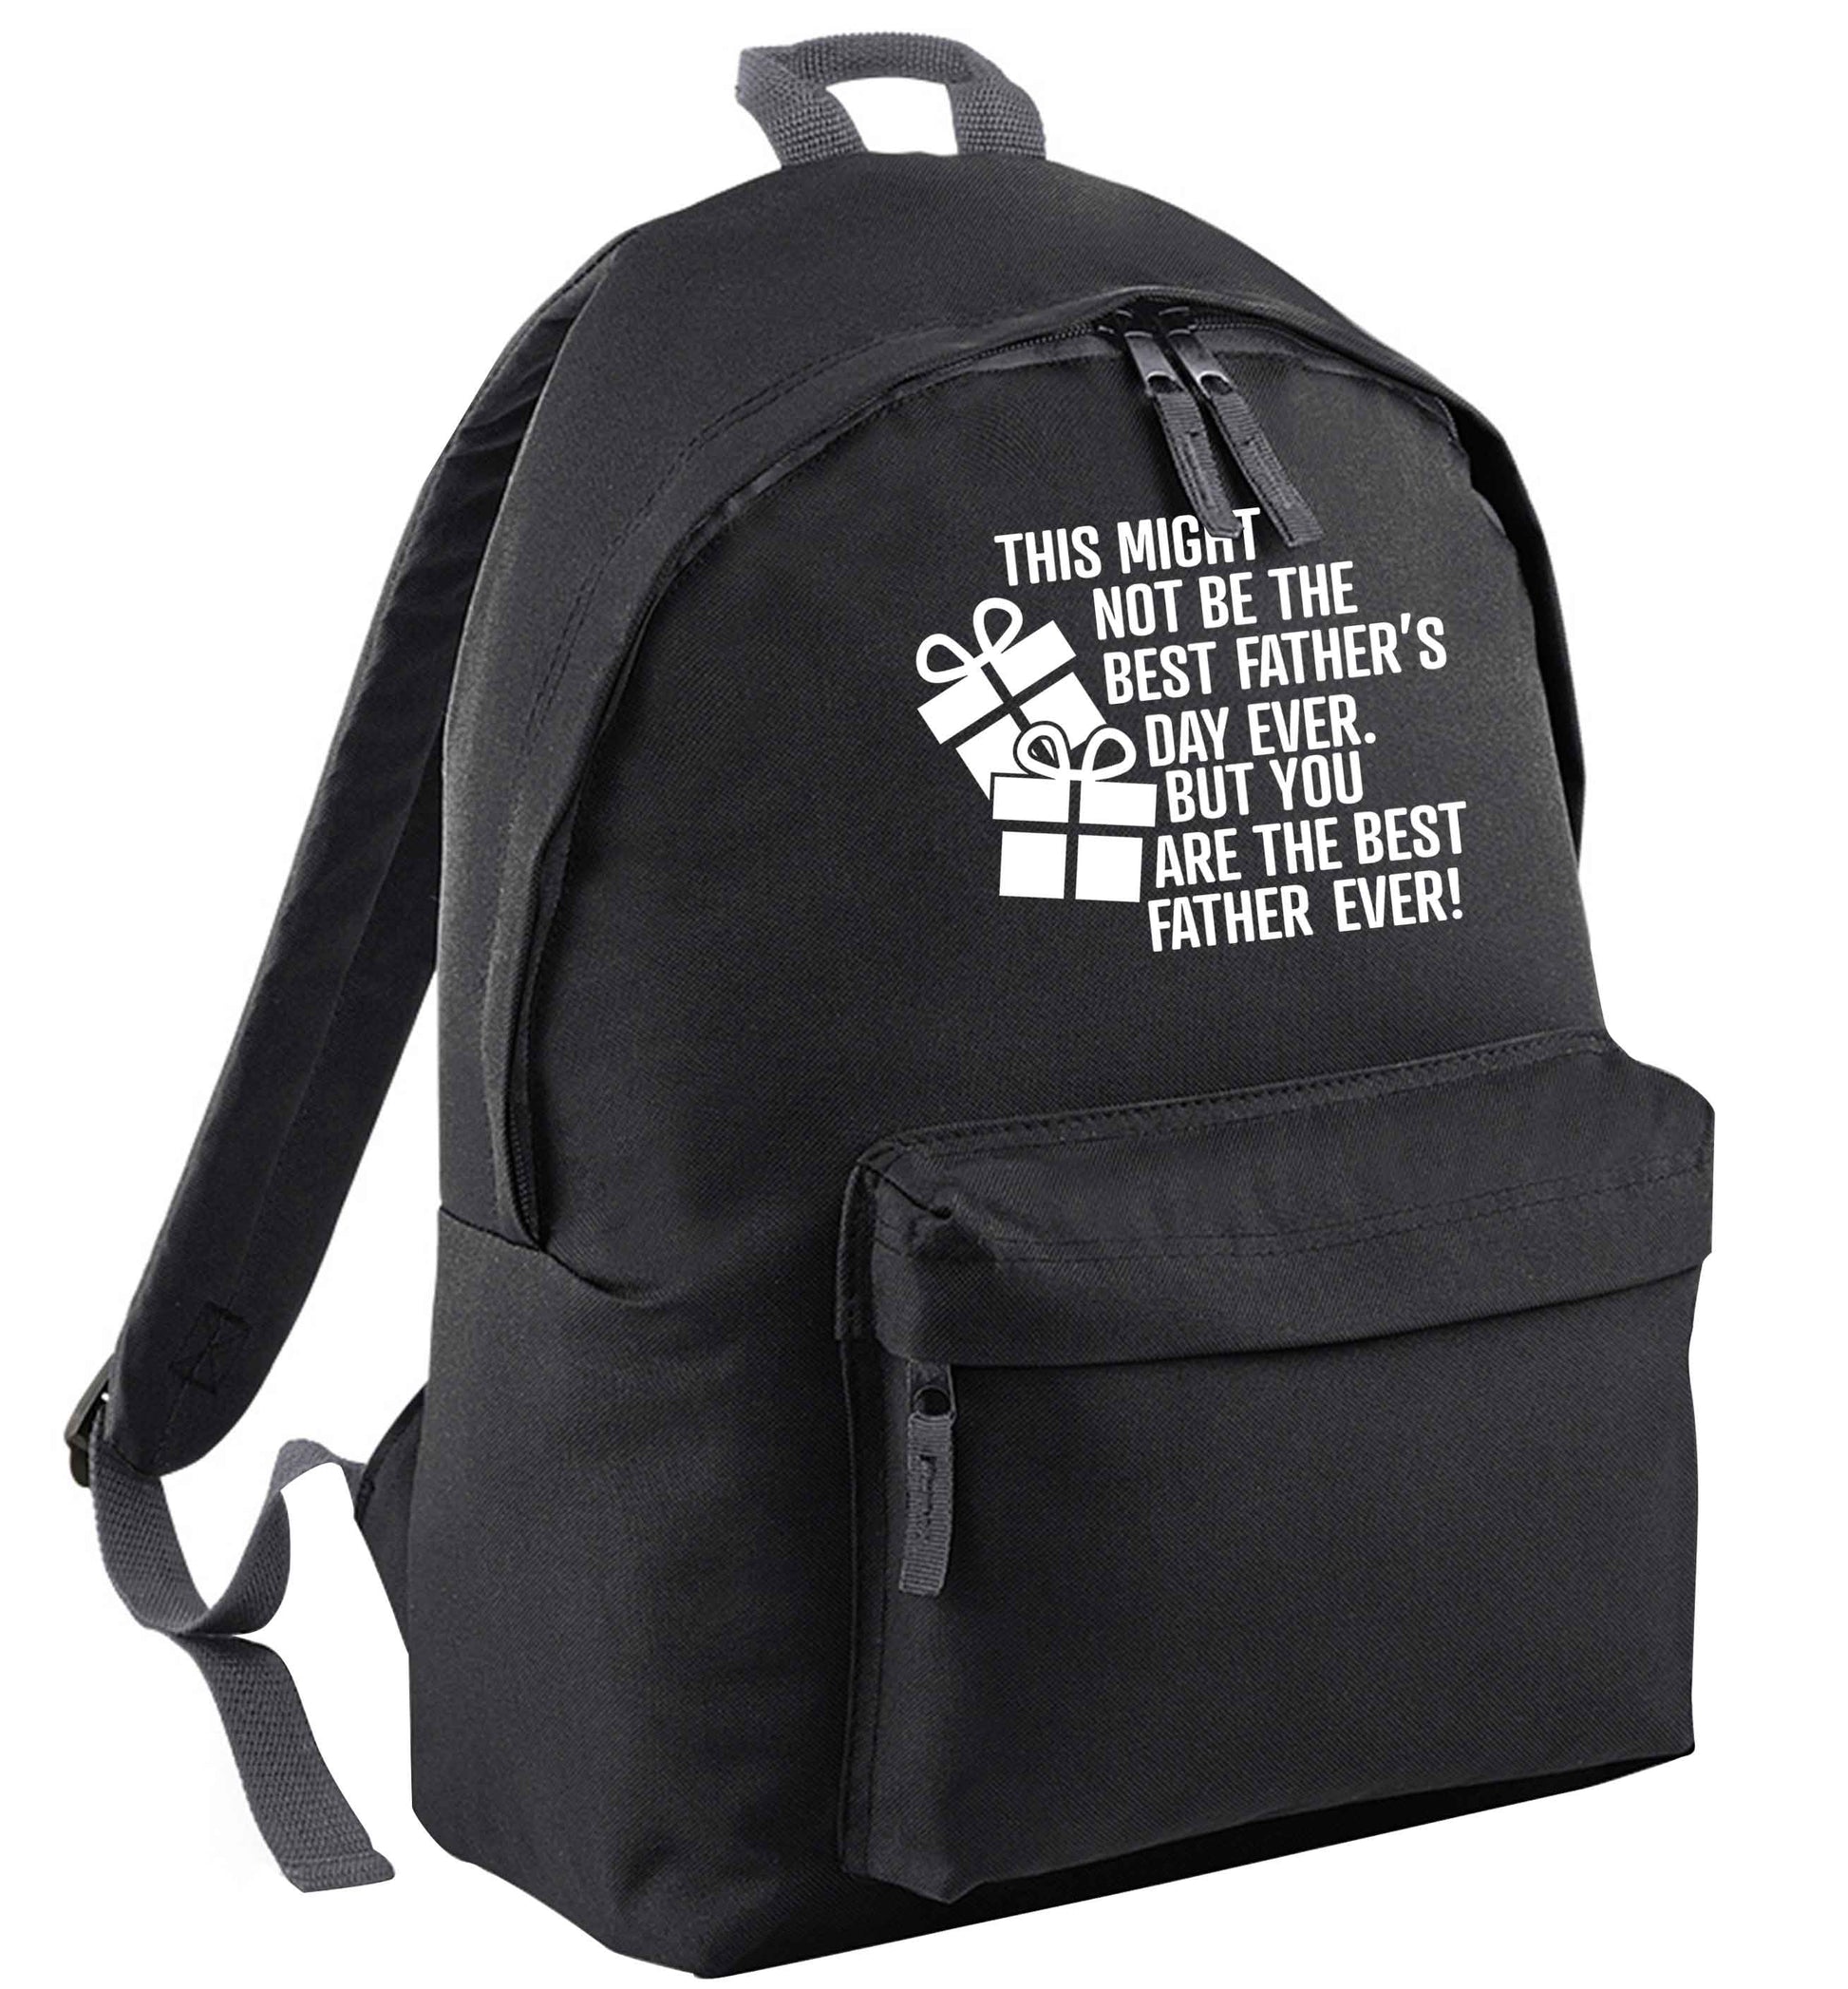 It might not be the best Father's Day ever but you are the best father ever! black adults backpack